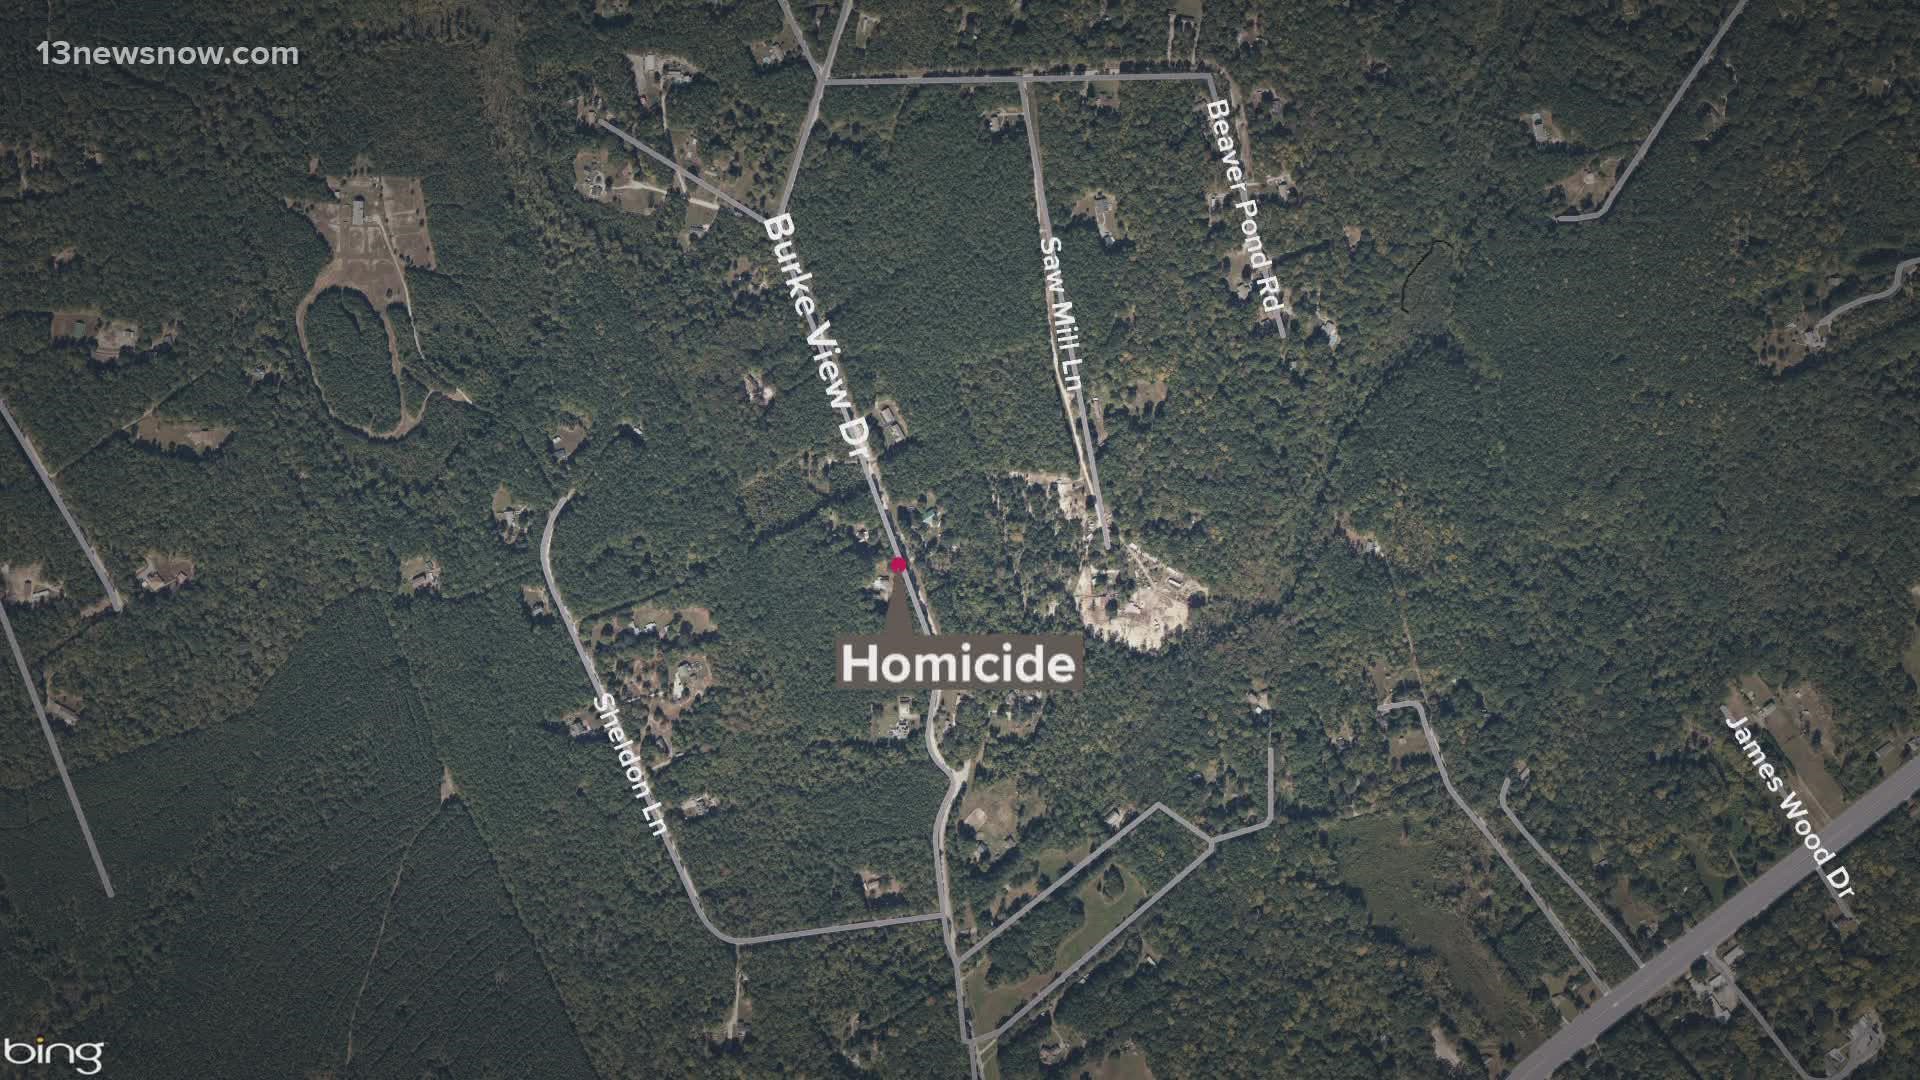 The sheriff's office is investigating a homicide Wednesday evening after a man reportedly shot and killed his wife.